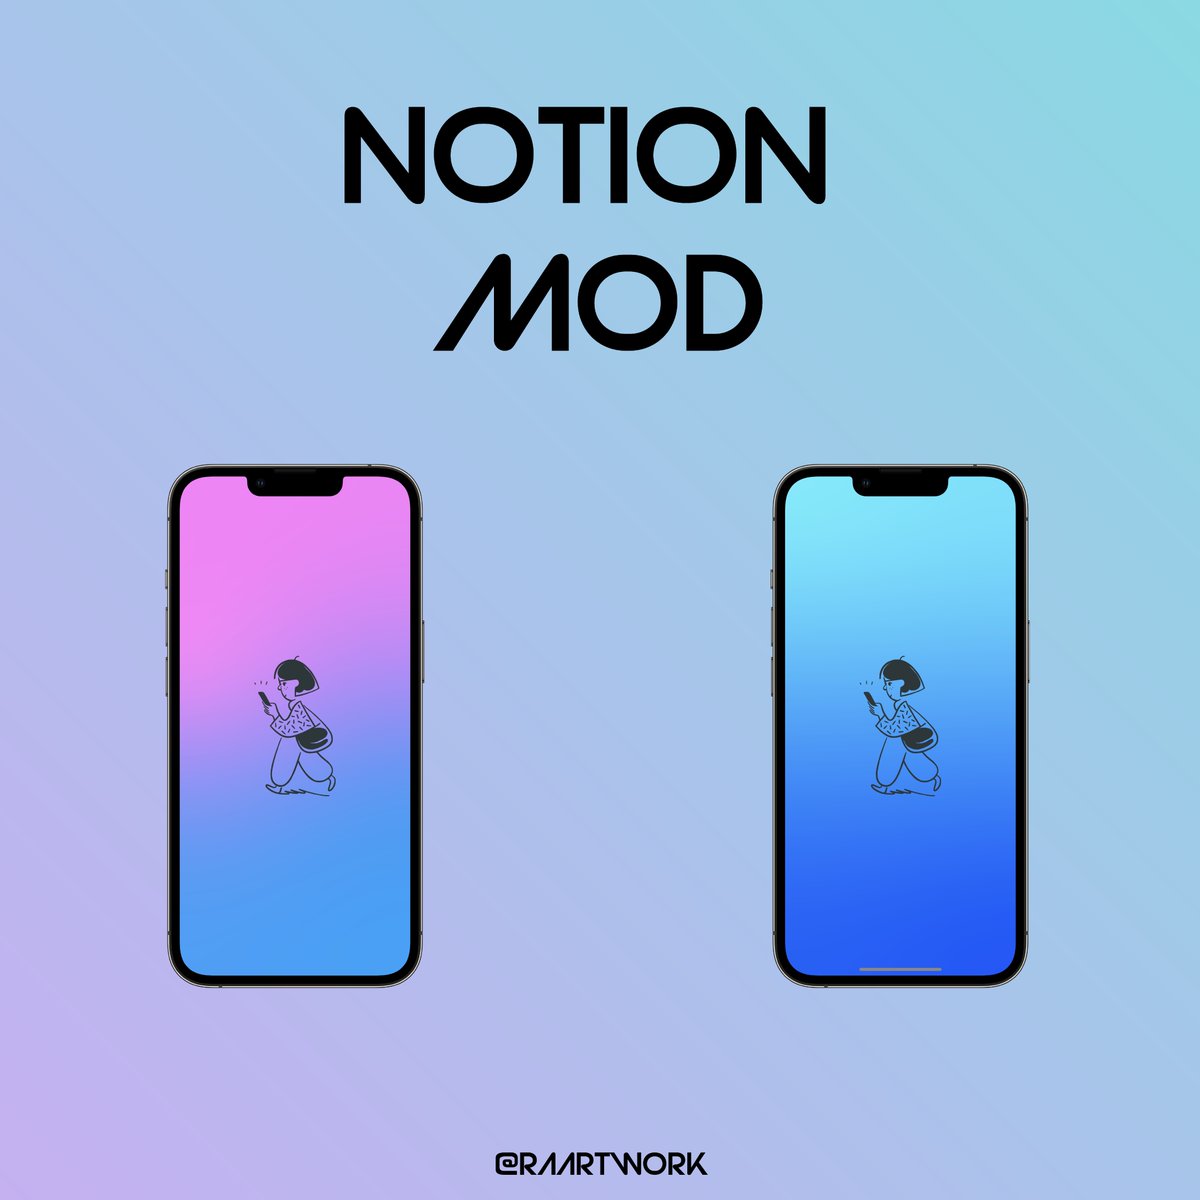 Notion Mod

Join: t.me/raartwork 🙃 

#wallpapers #ios #android #homescreen #wallpapertuesdays #creativity #iossetup #androidsetup #notion